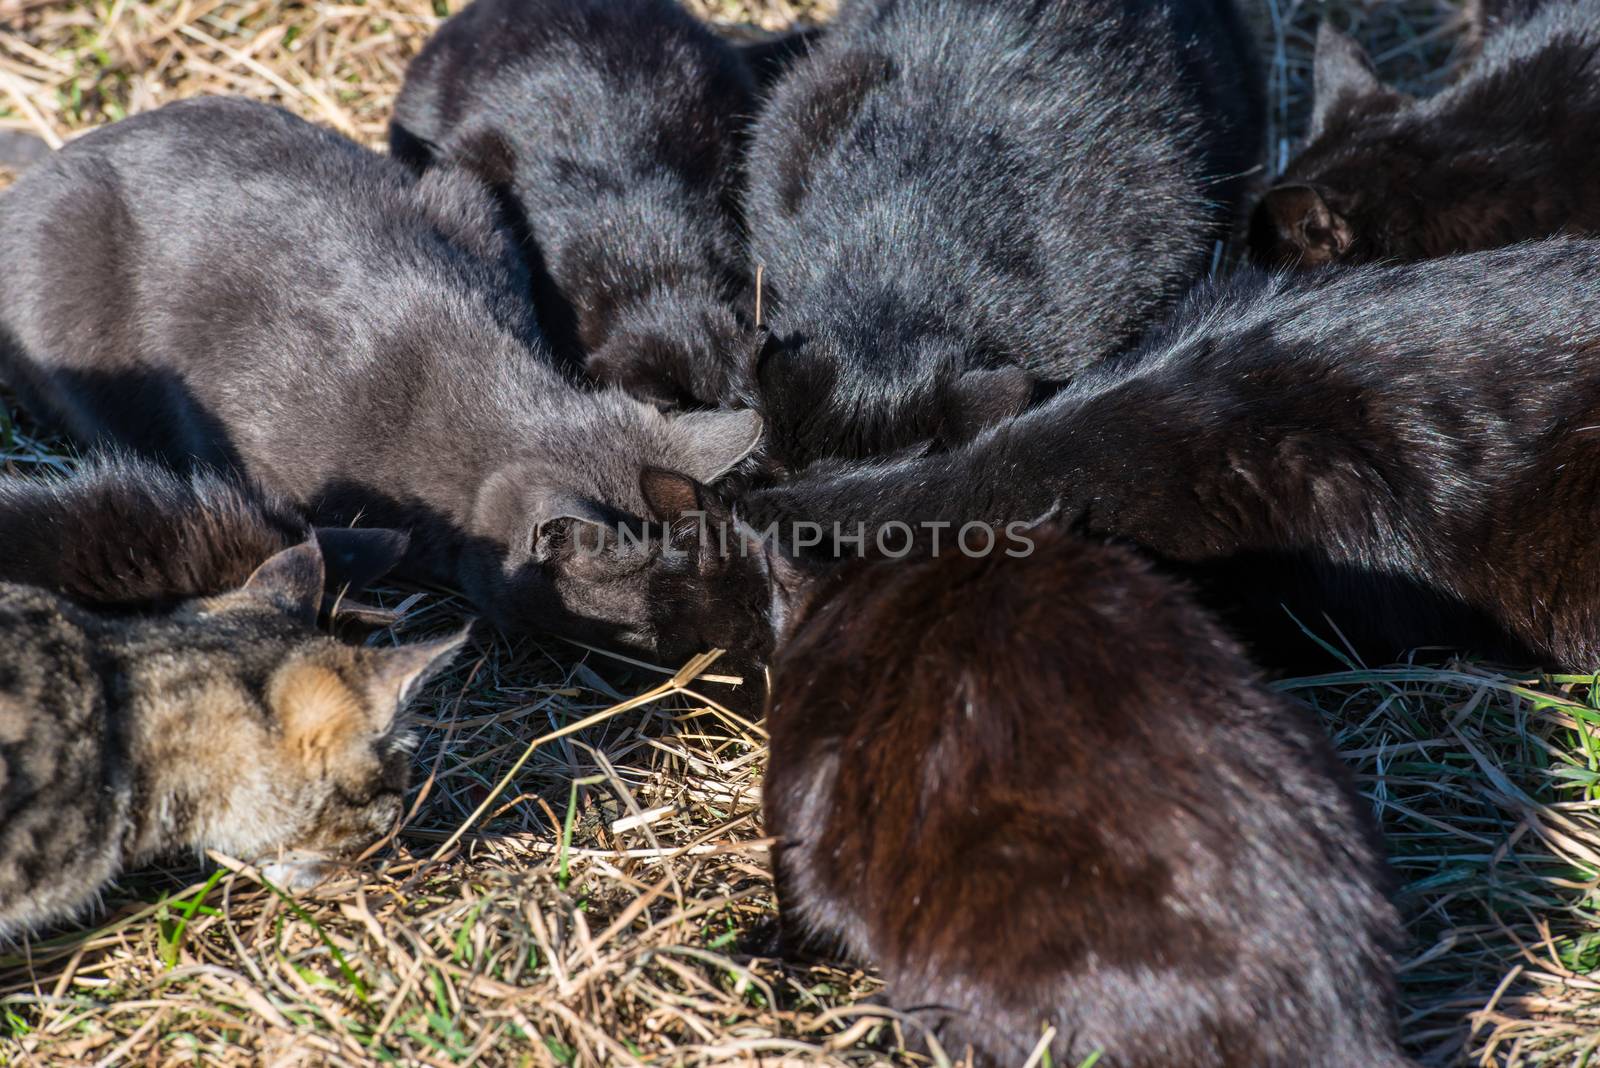 Group of black cats eating on the ground with green grass